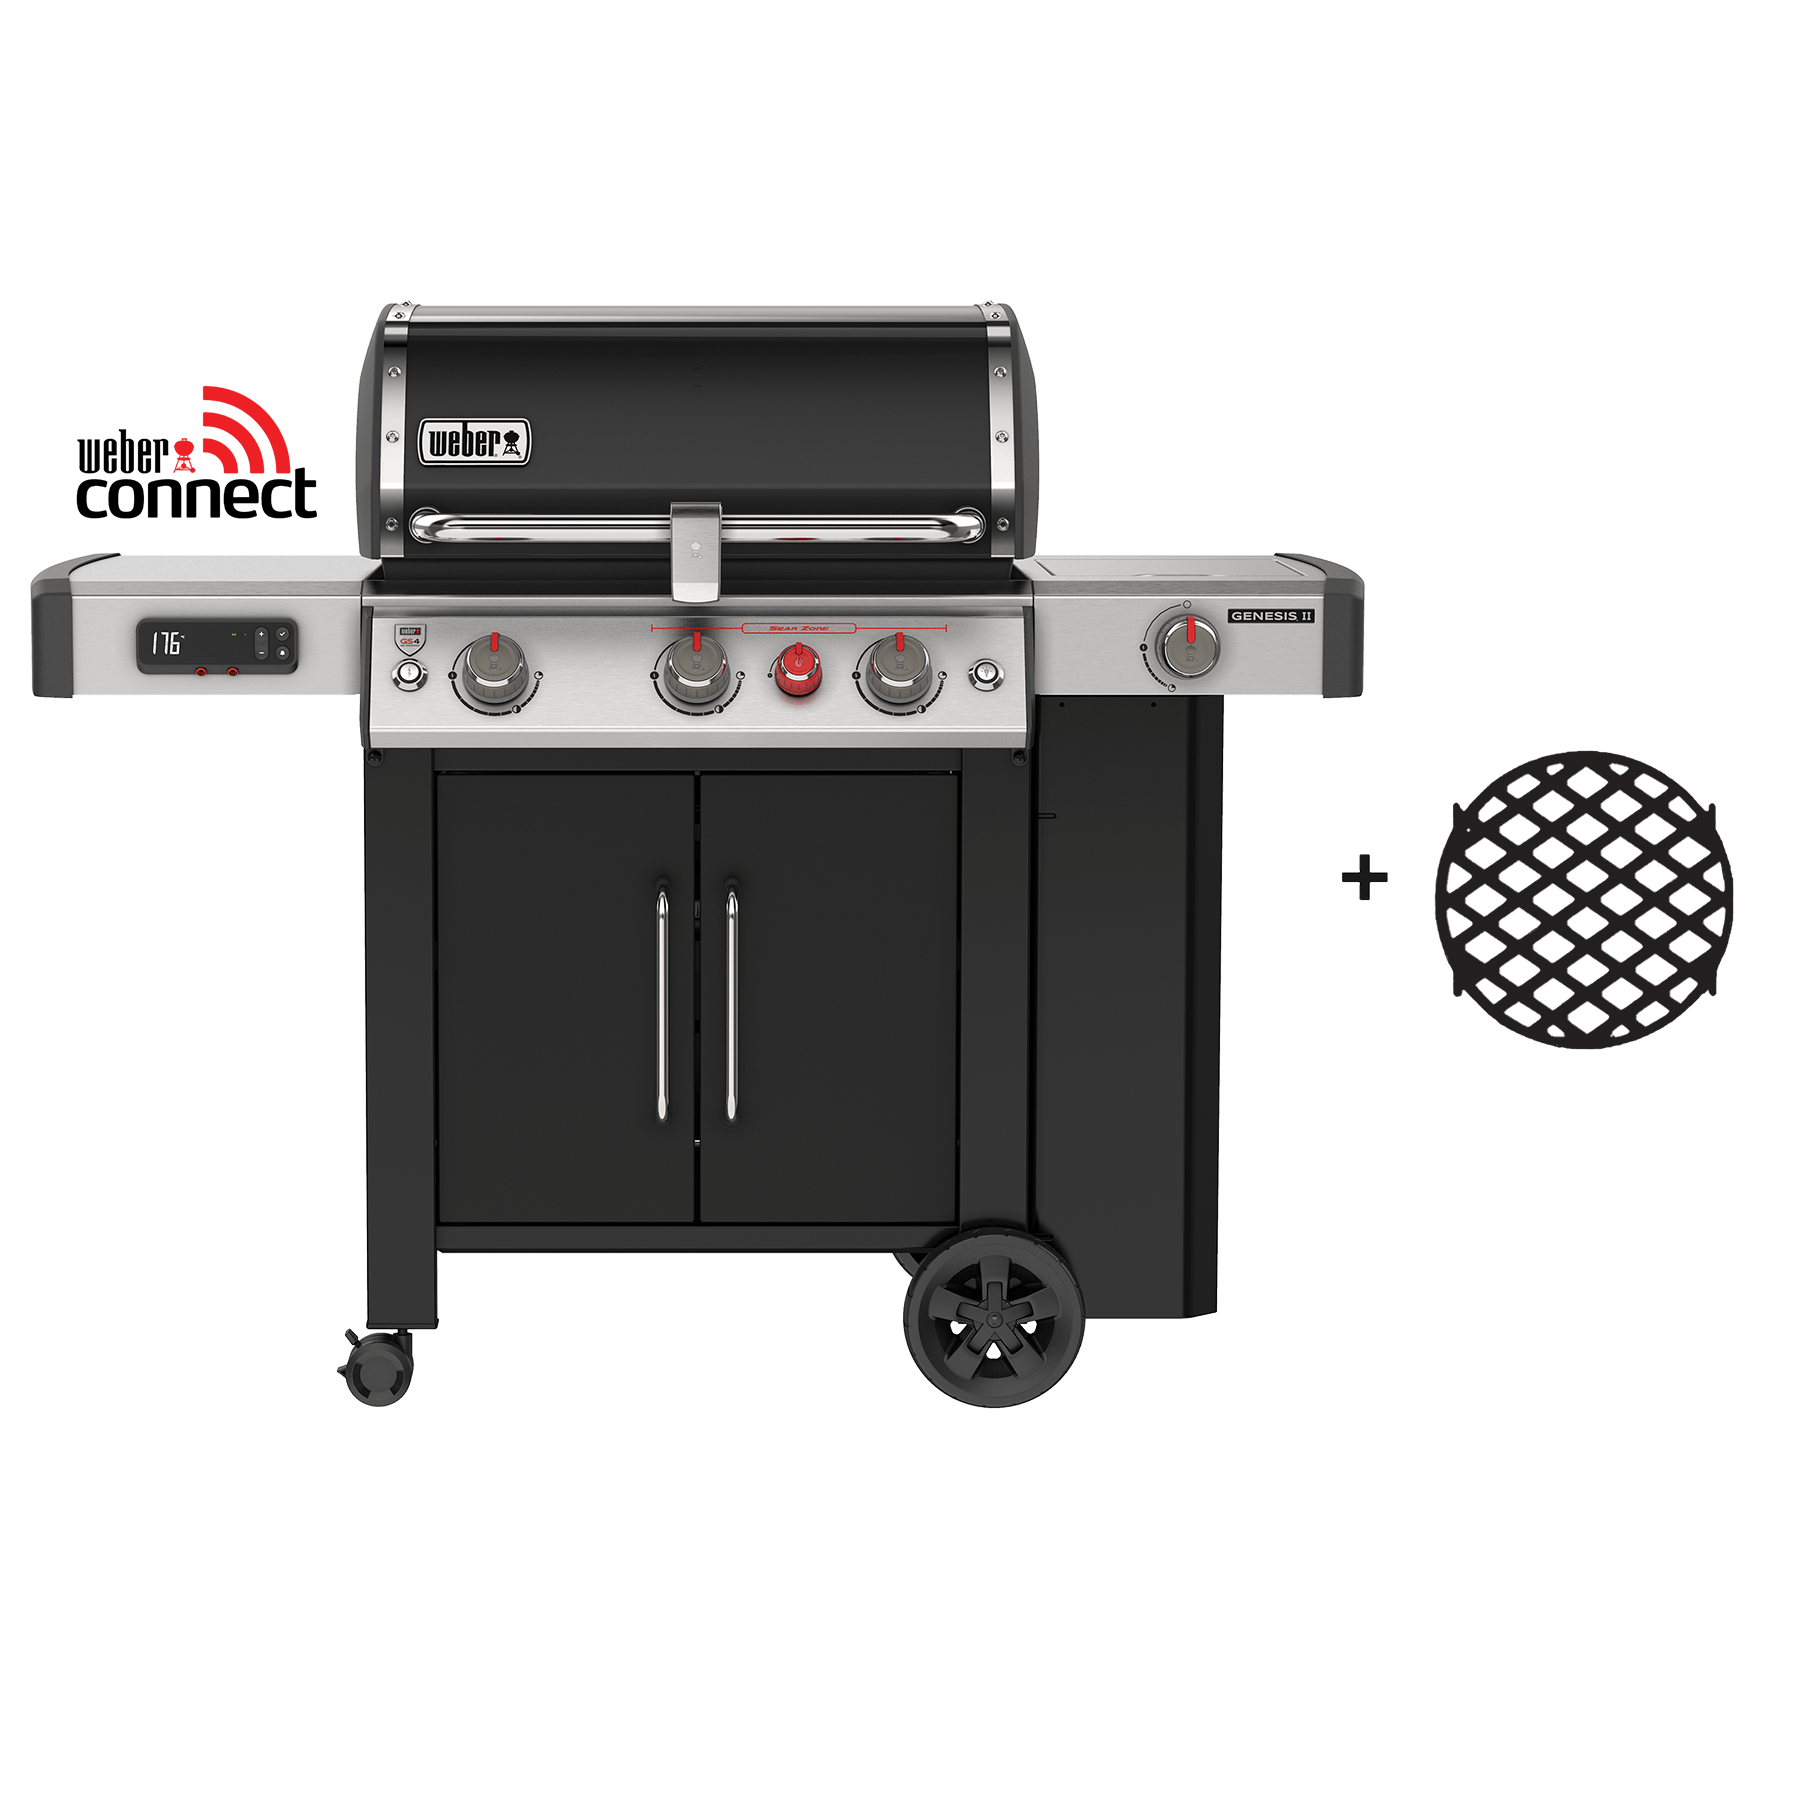 https://www.weber.com/NL/nl/barbecues/gasbarbecues/genesis-ii-serie/117642_2022-EX-315-Accessories.html daily 0.5 https://product-images.weber.com/sets-images/Genesis-EX-315-Accessories-Bundle-4-Bild-1.png?auto ...